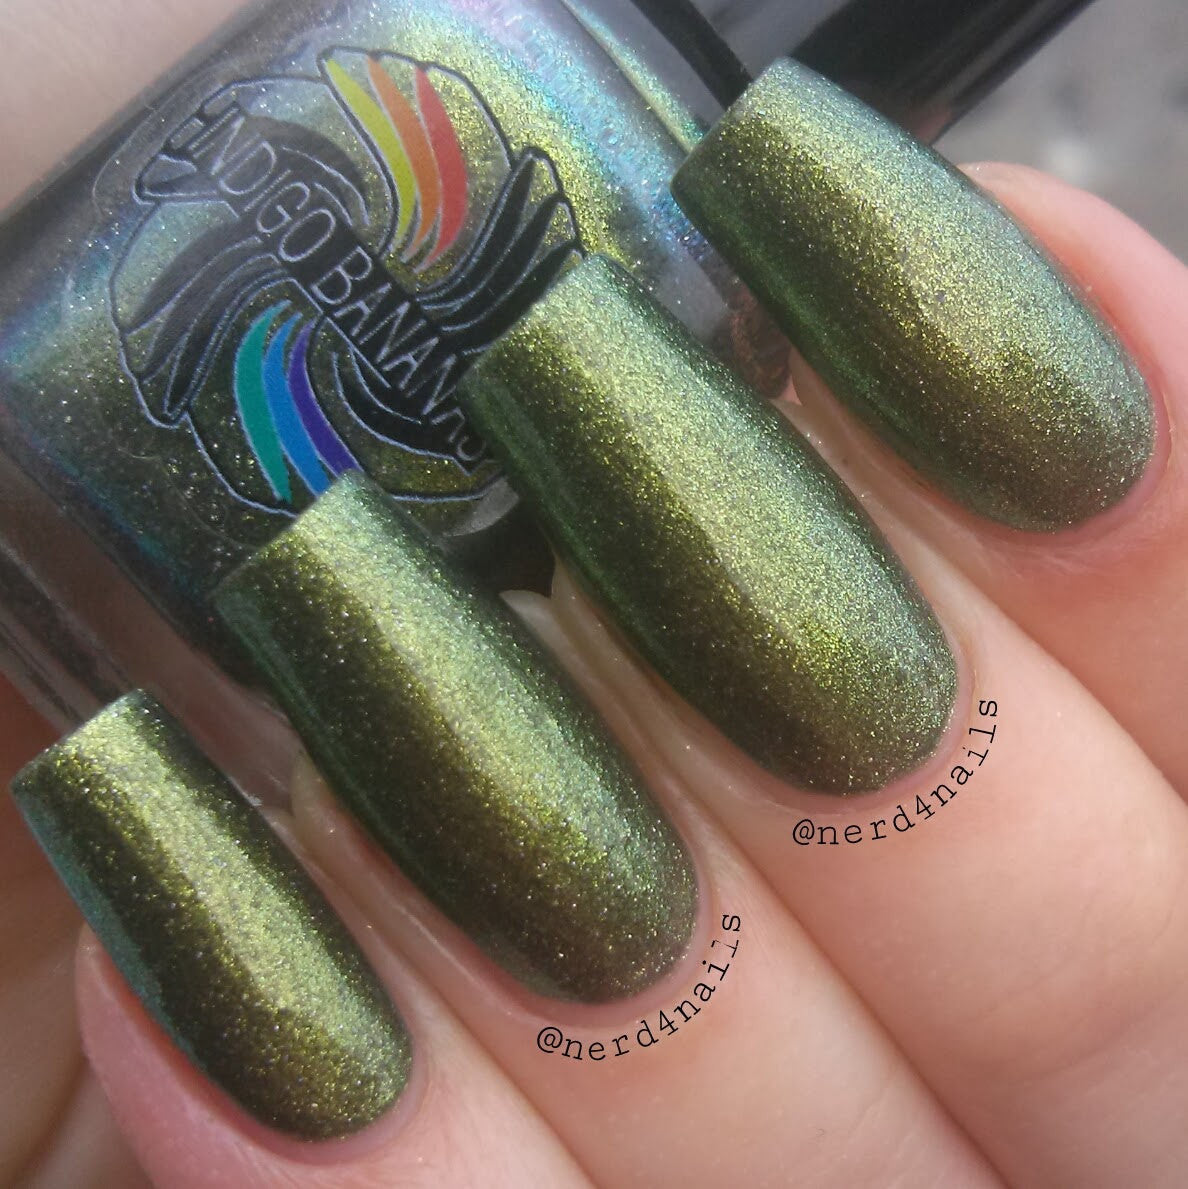 Pan - olive/green multichrome